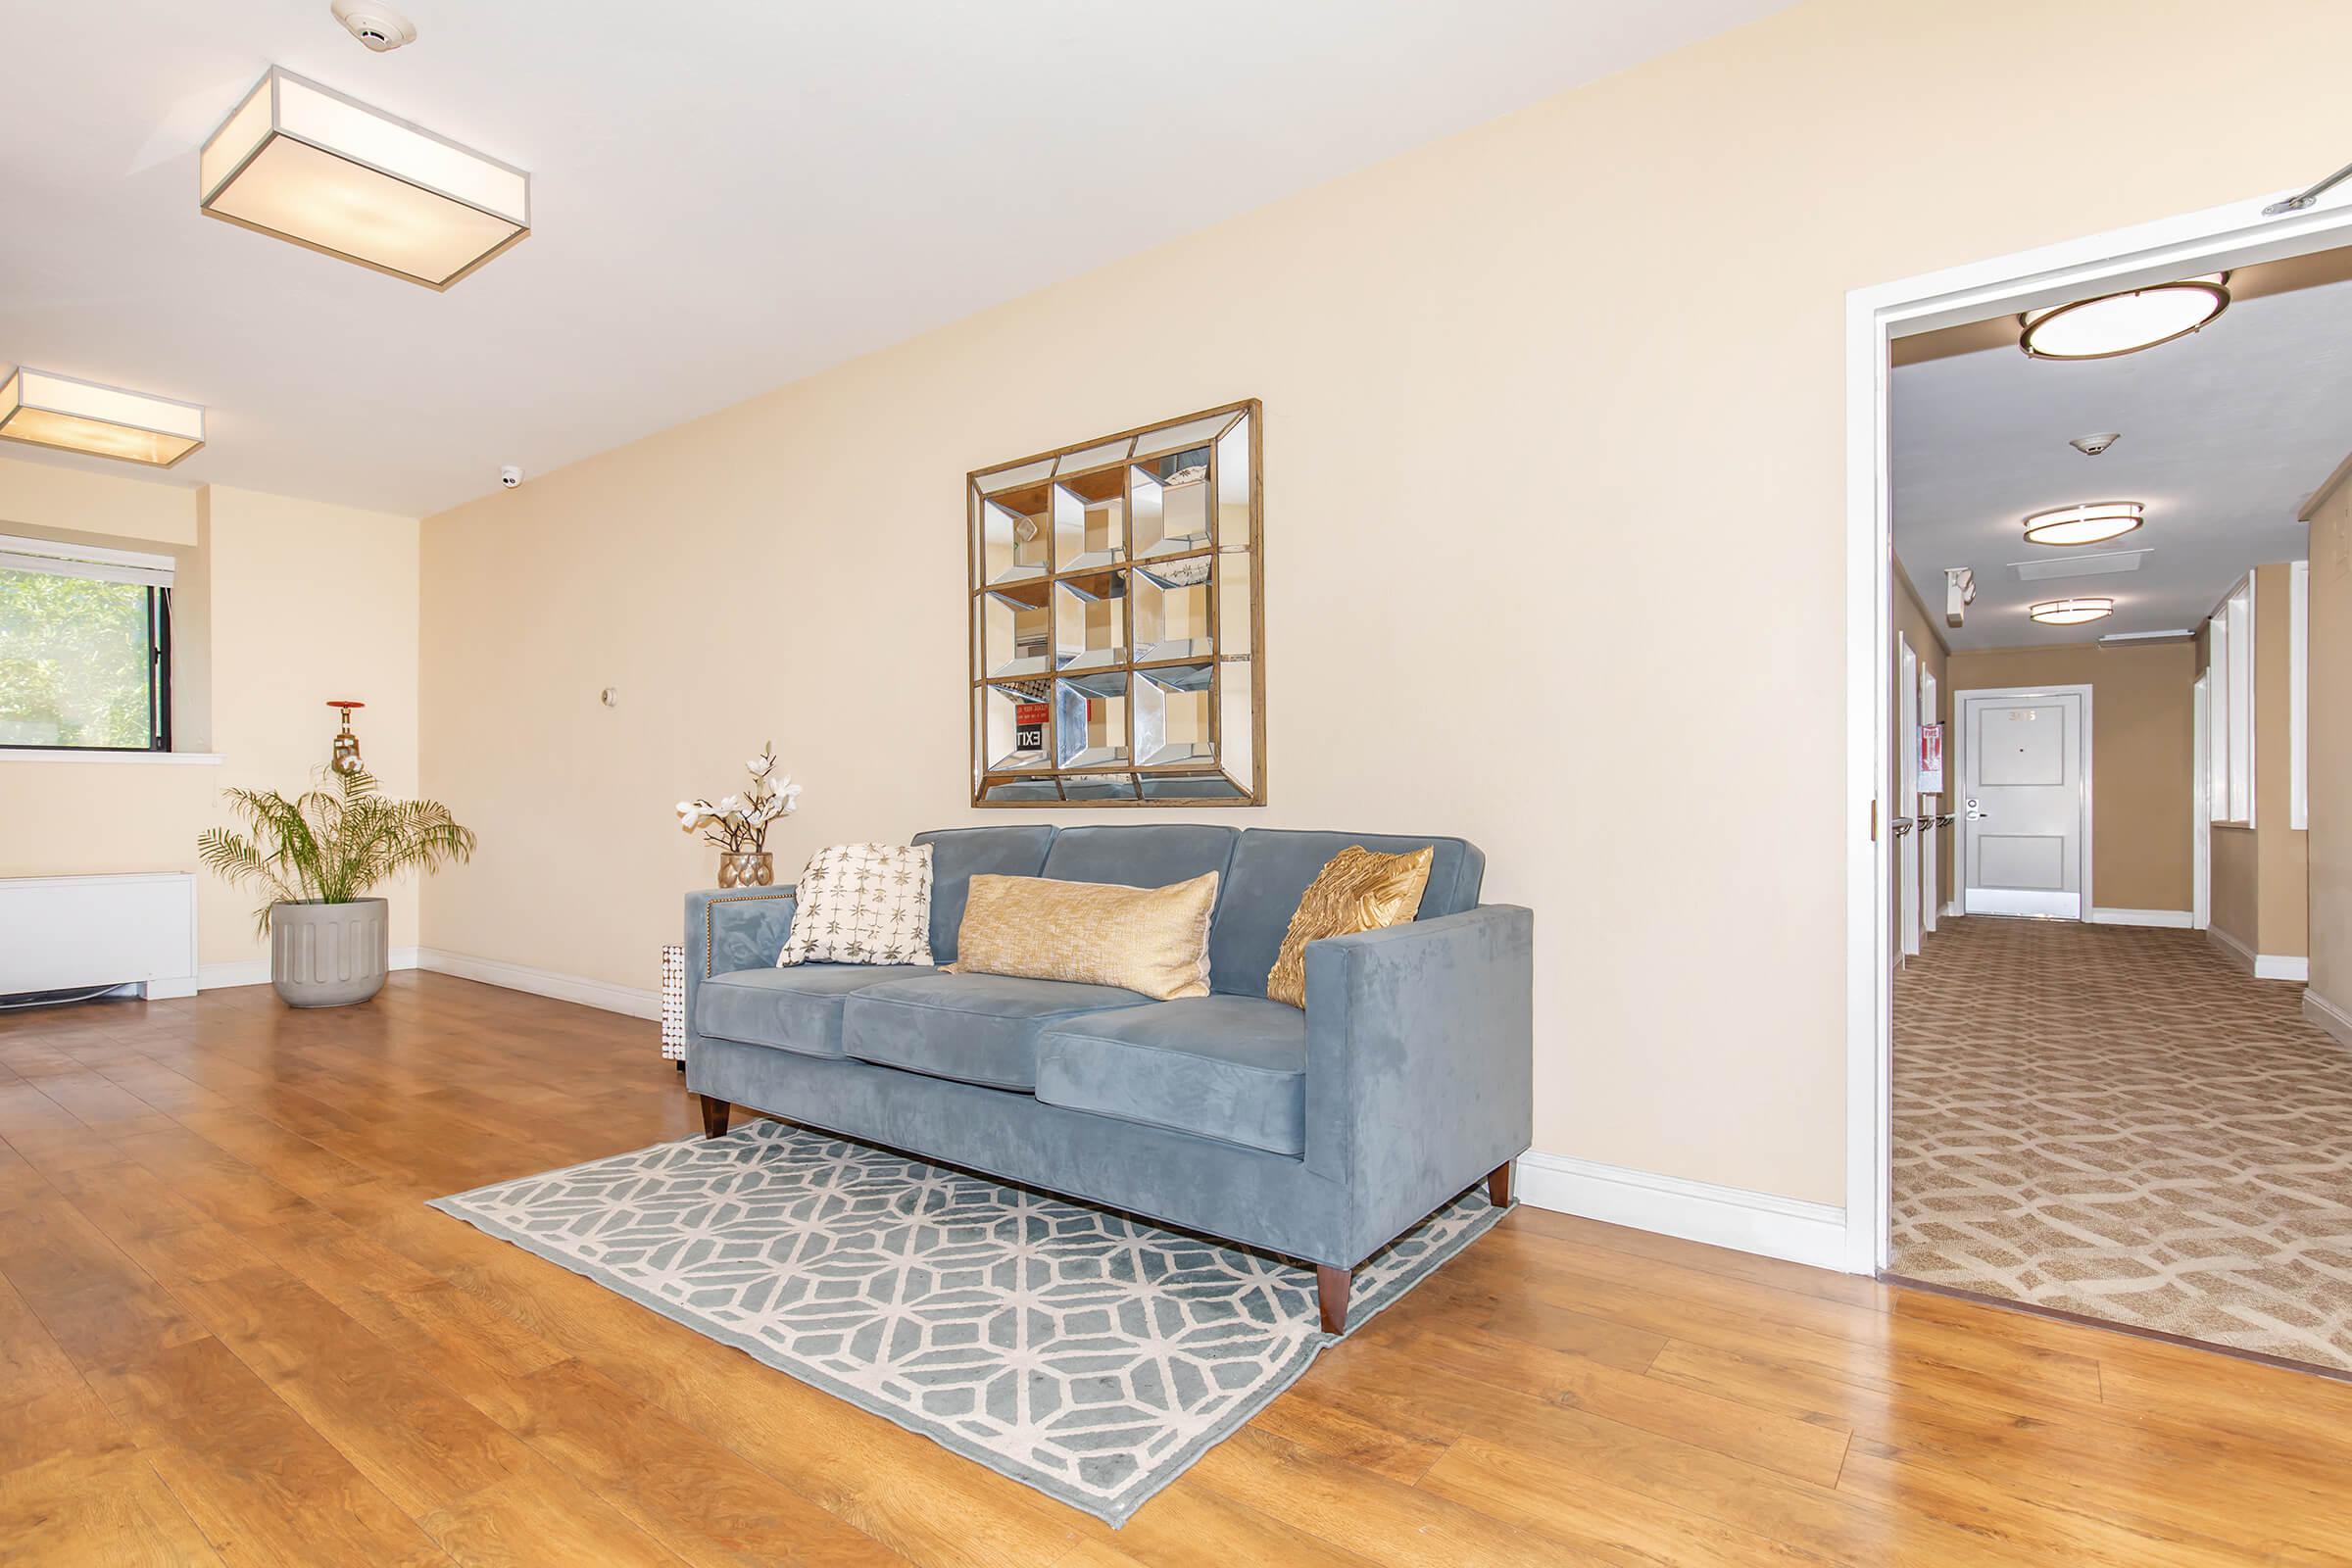 Community room with wooden floors and blue couch